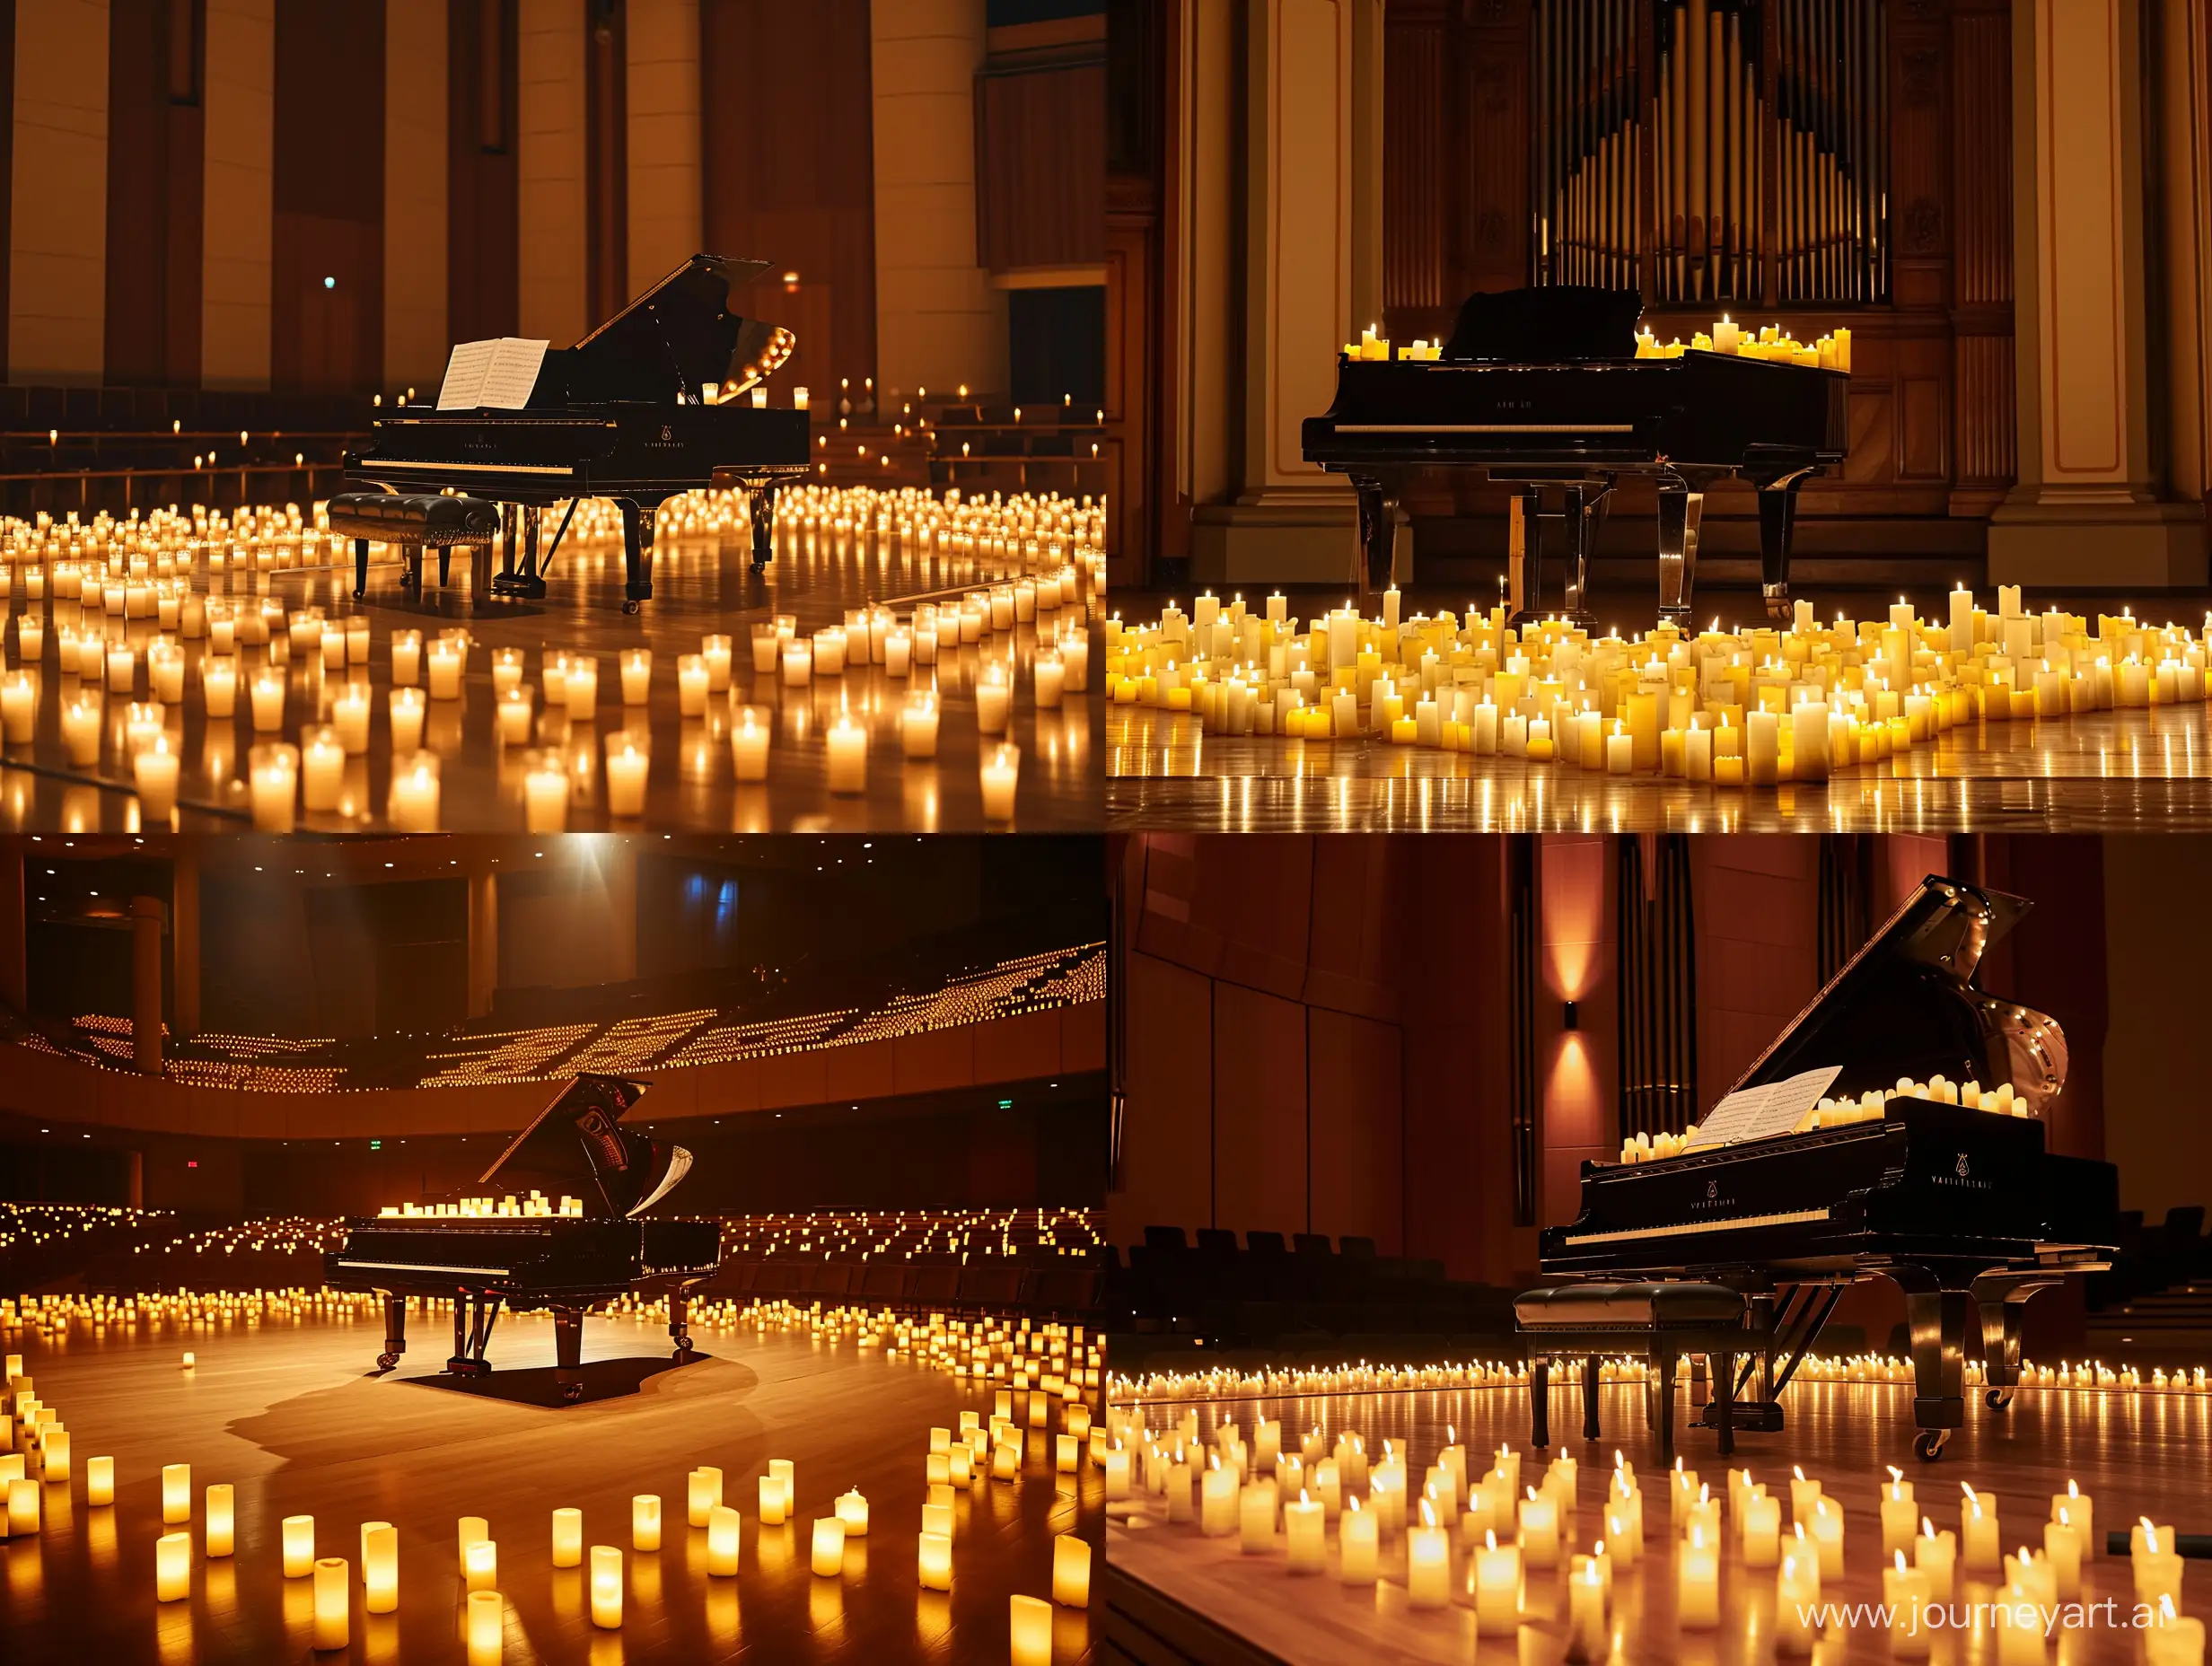 Enchanting-Piano-Performance-with-a-Thousand-Candles